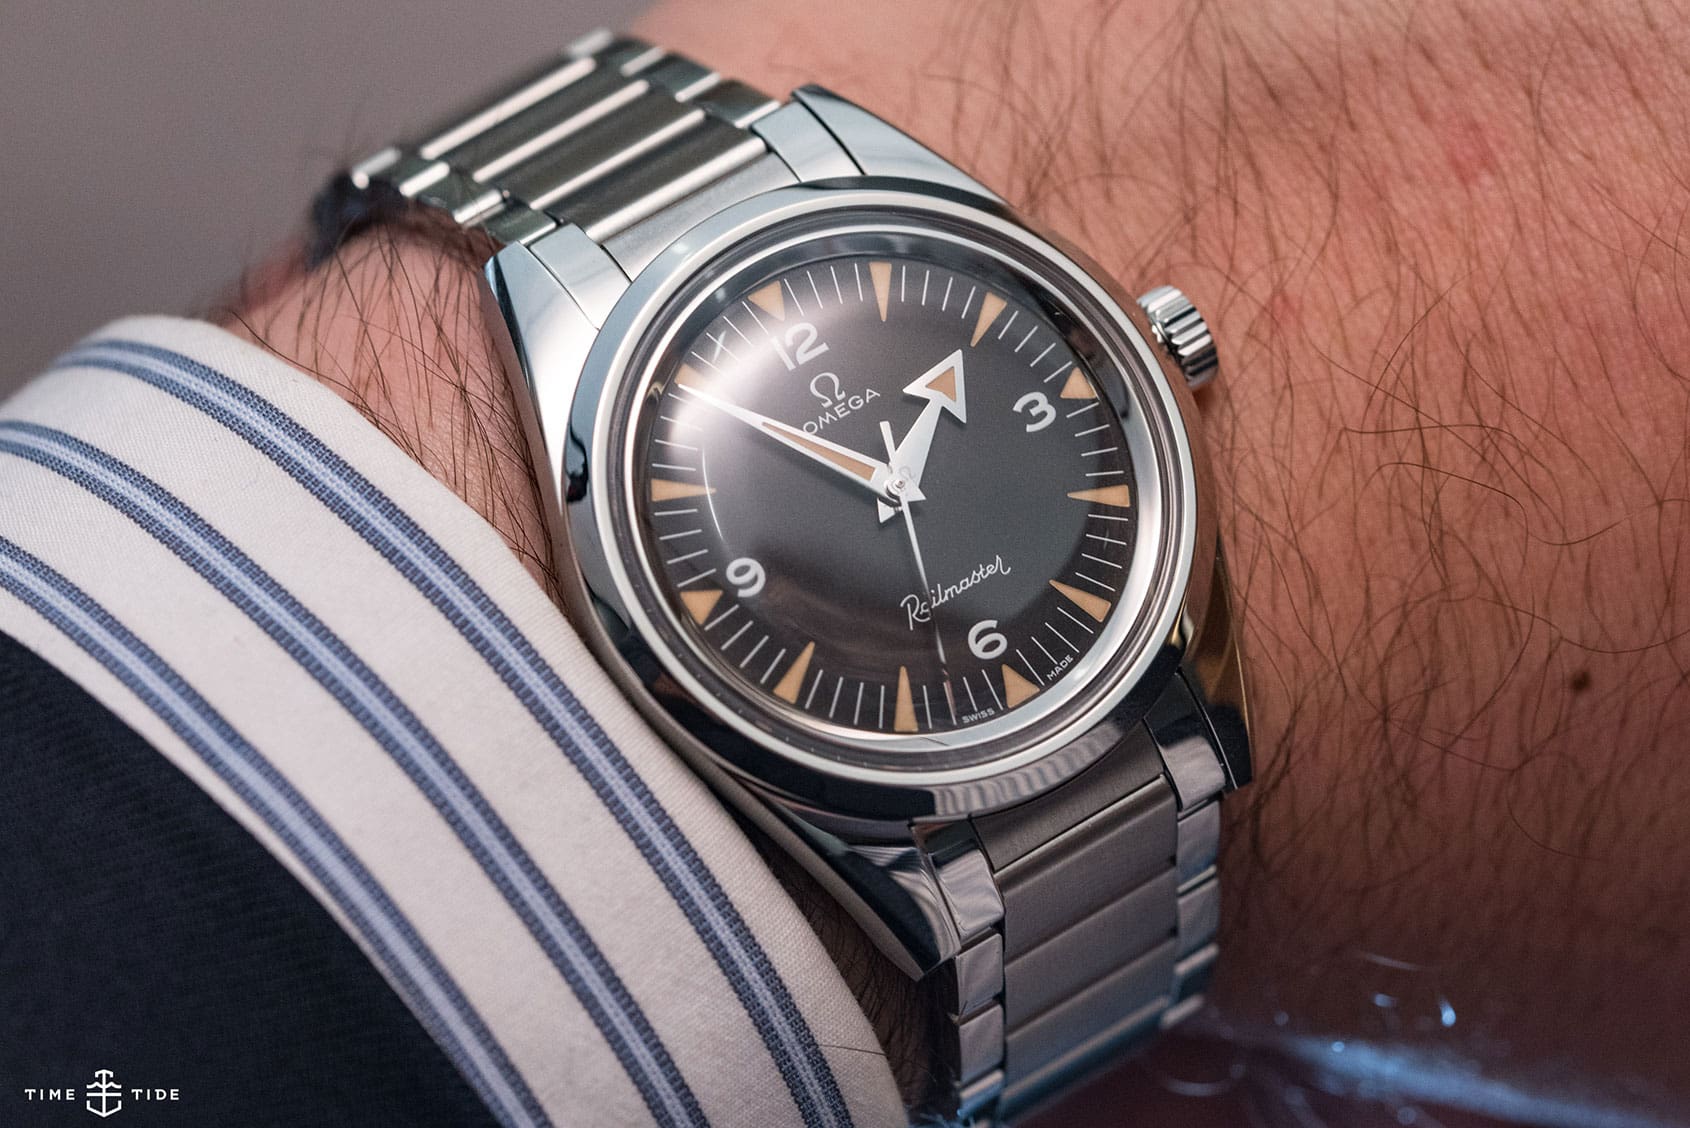 INSIGHT: Speedmaster, Seamaster, Railmaster – which Omega 1957 Trilogy watch is right for you?